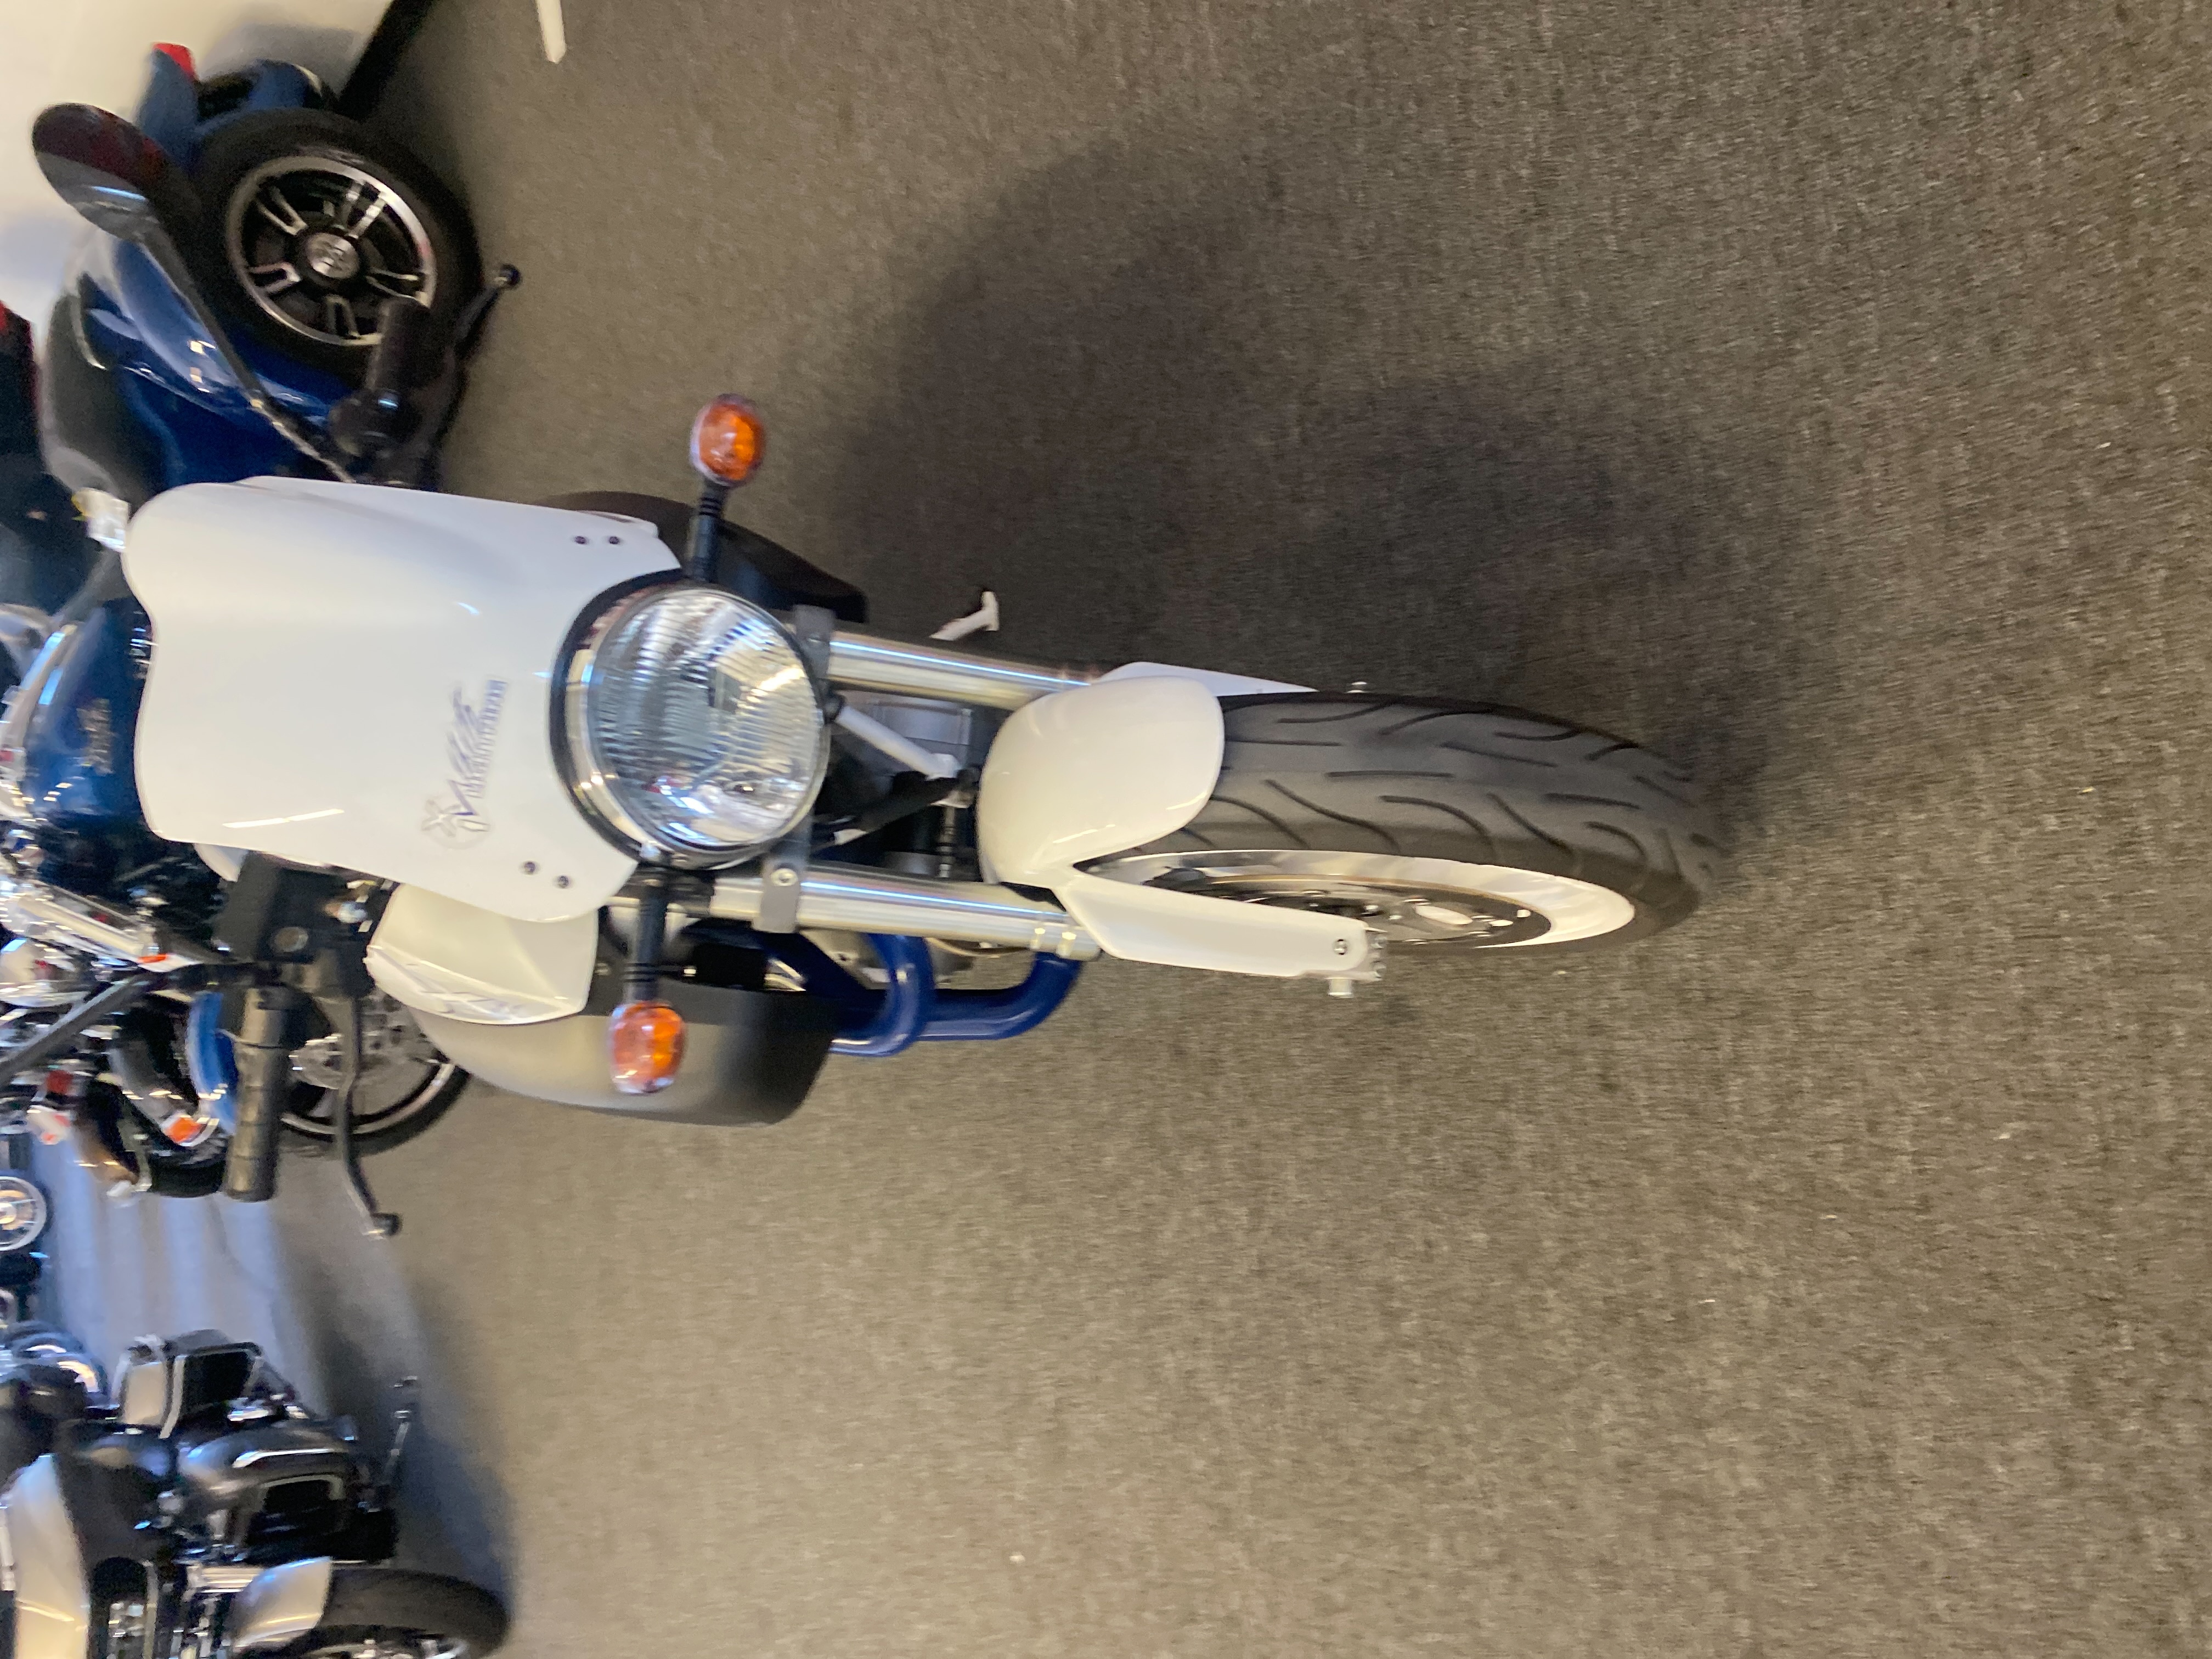 2002 BUELL X1 LTNG at Outpost Harley-Davidson